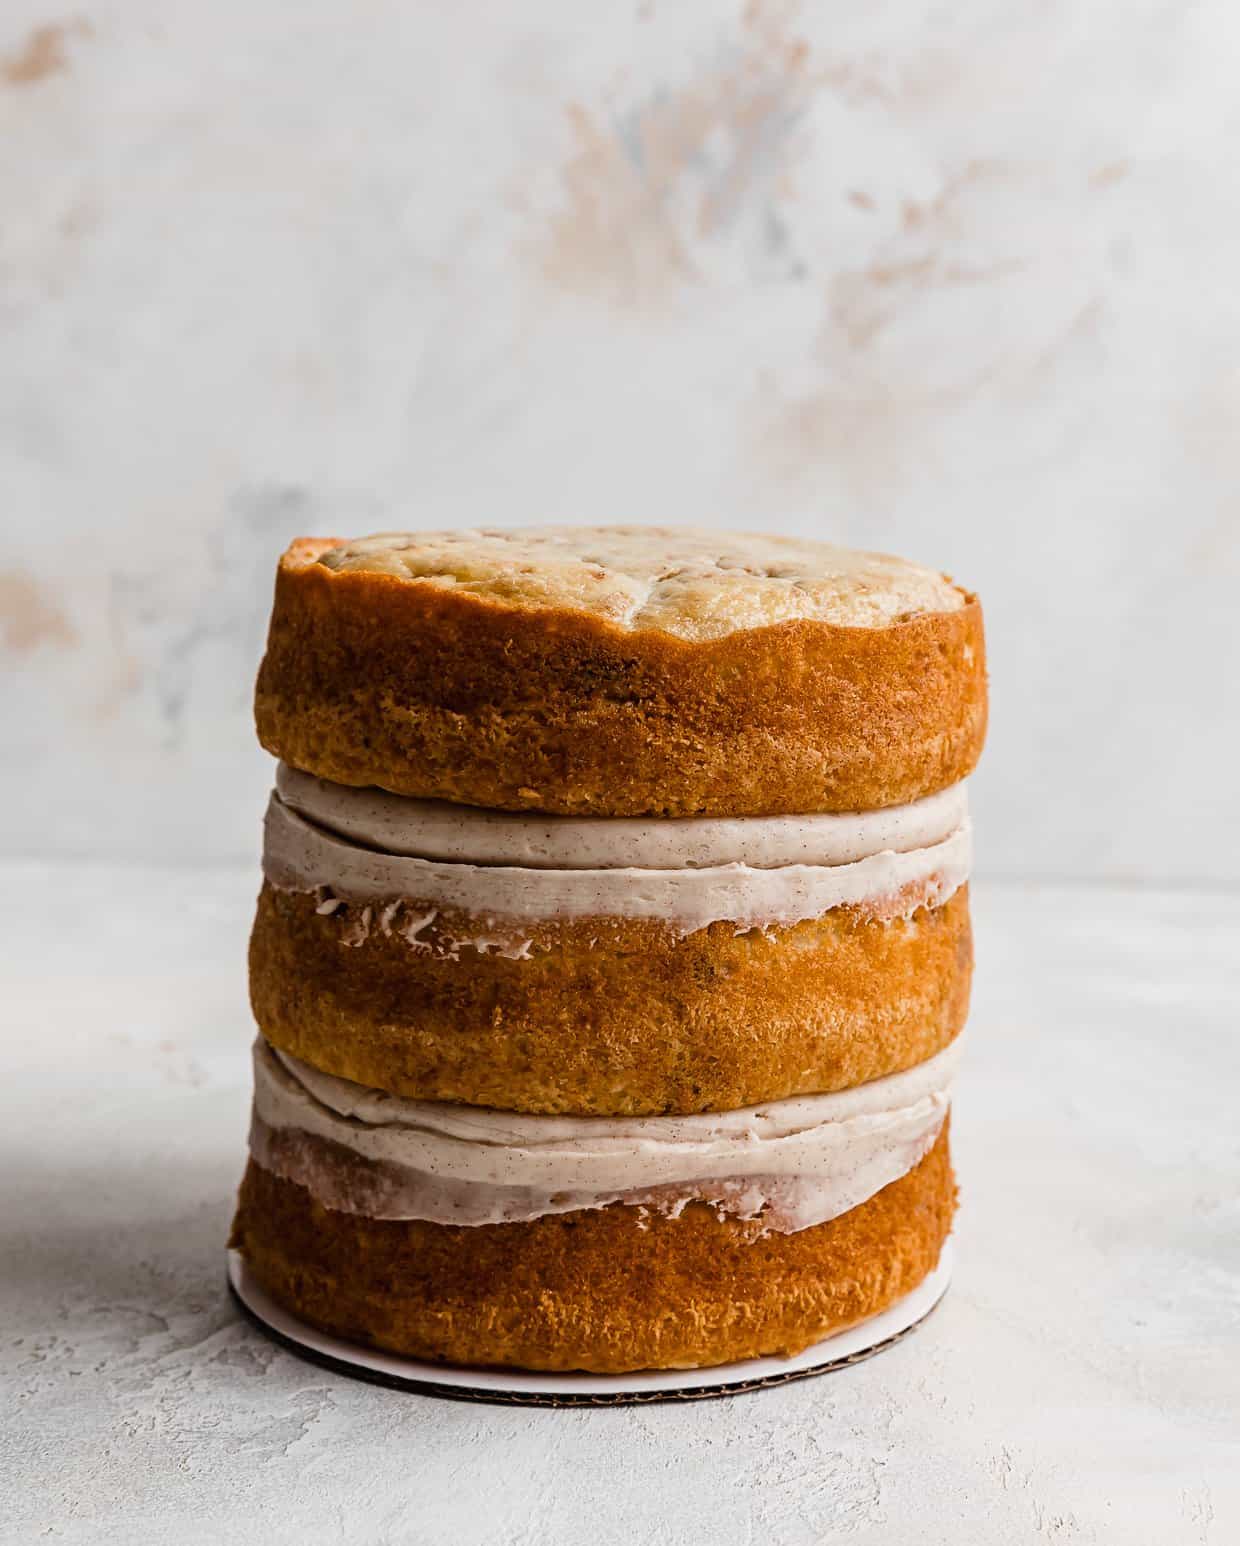 Three round Coconut Cinnamon Cake layers stacked on top of each other.